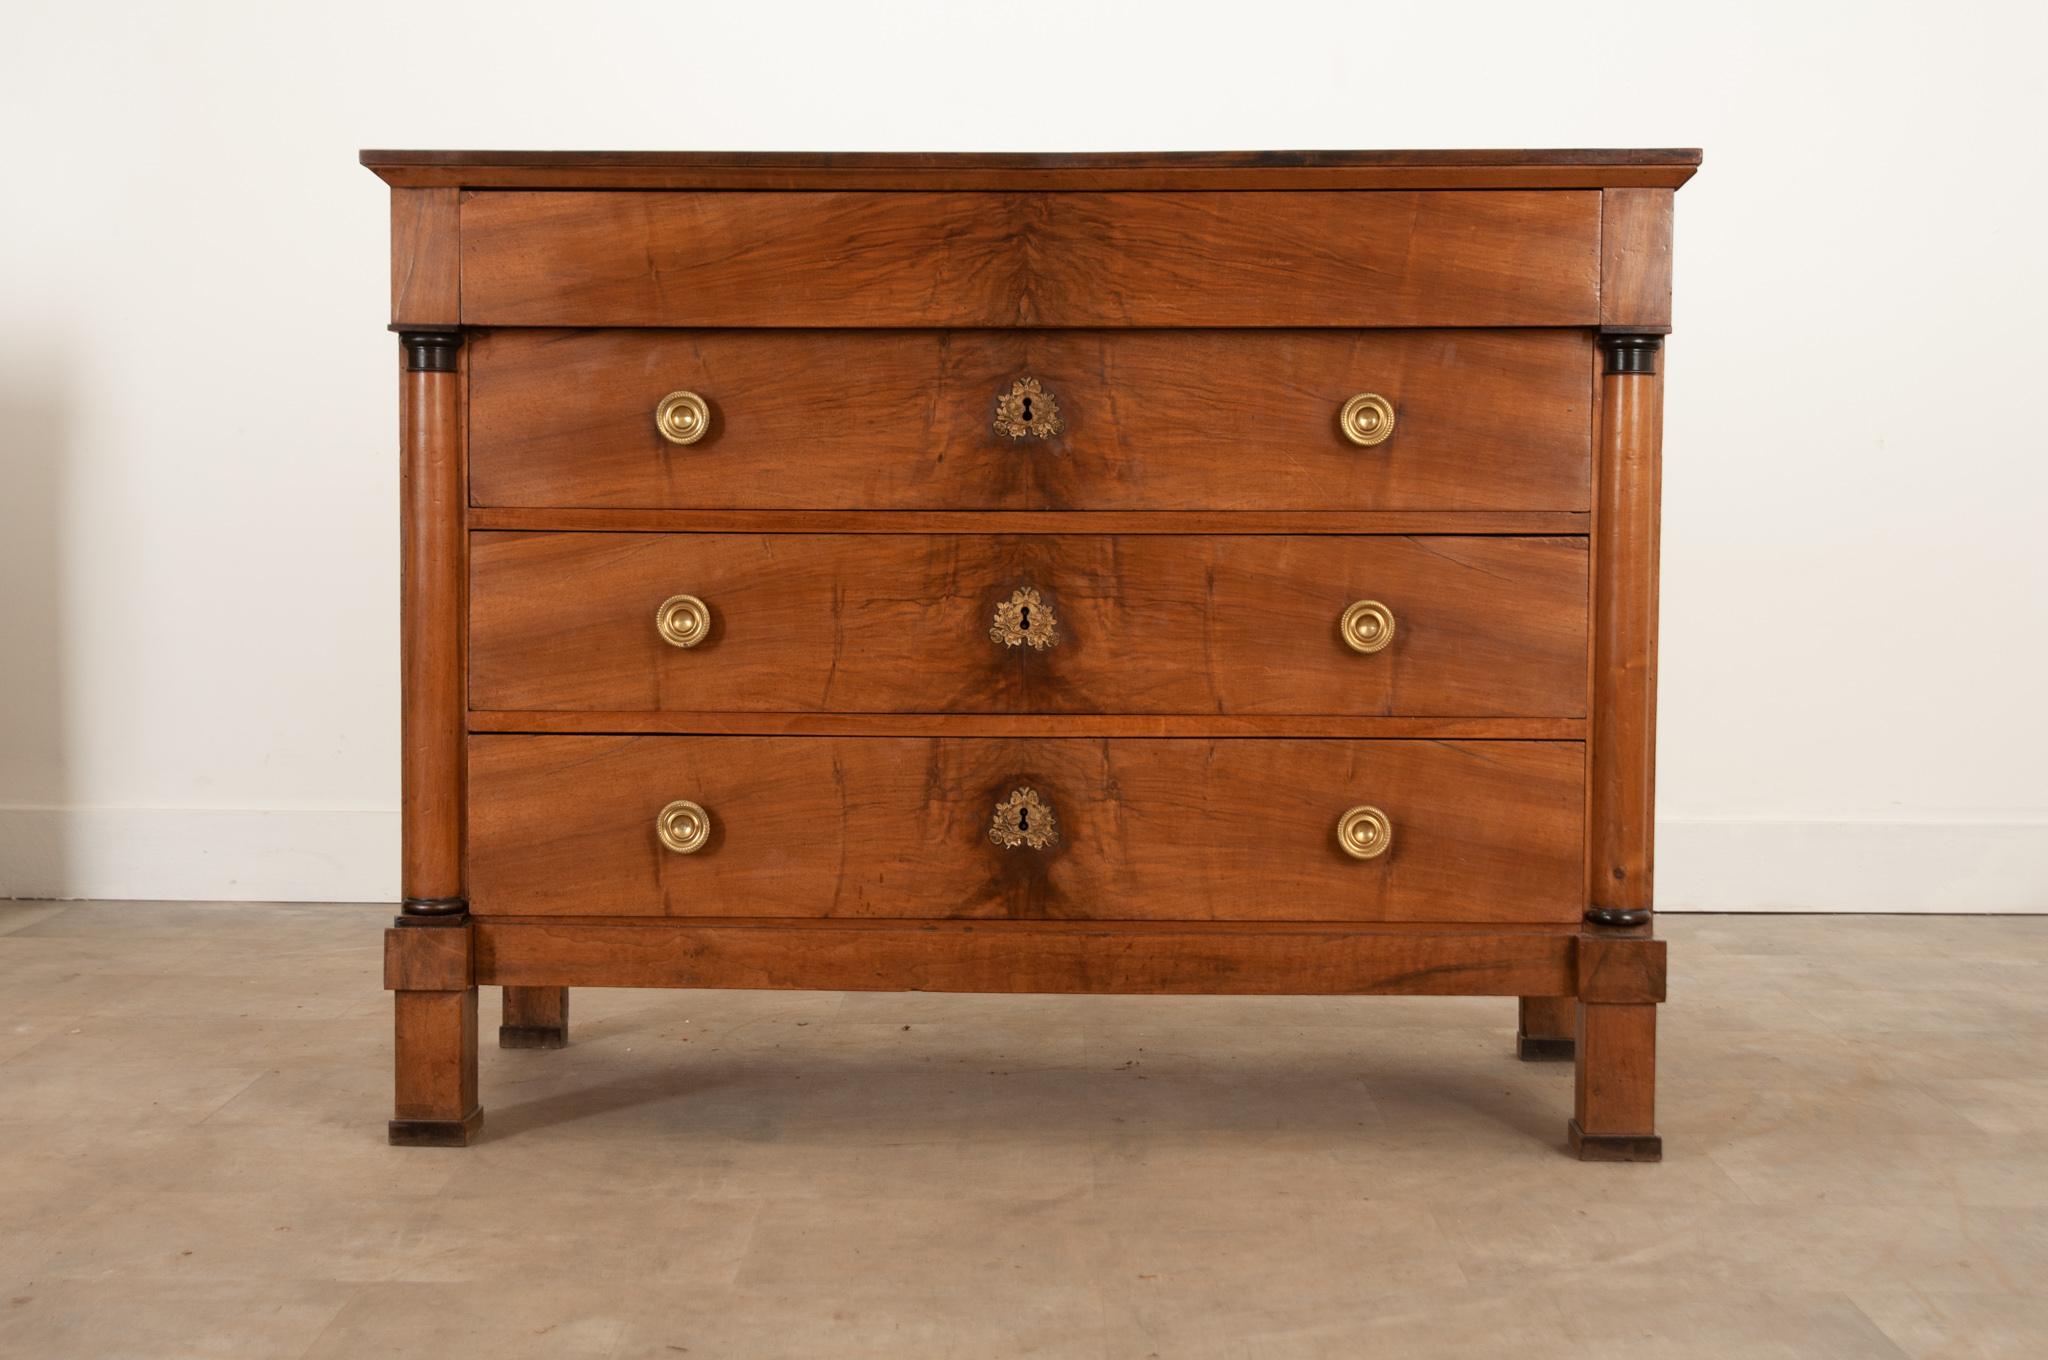 A handsome bookmatched walnut commode from France crafted during the 1830s. Composed in the Empire style. The apron houses a hidden drawer above a bank of three equally sized drawers below. Each drawer front is fixed with a pair of lustrous circular